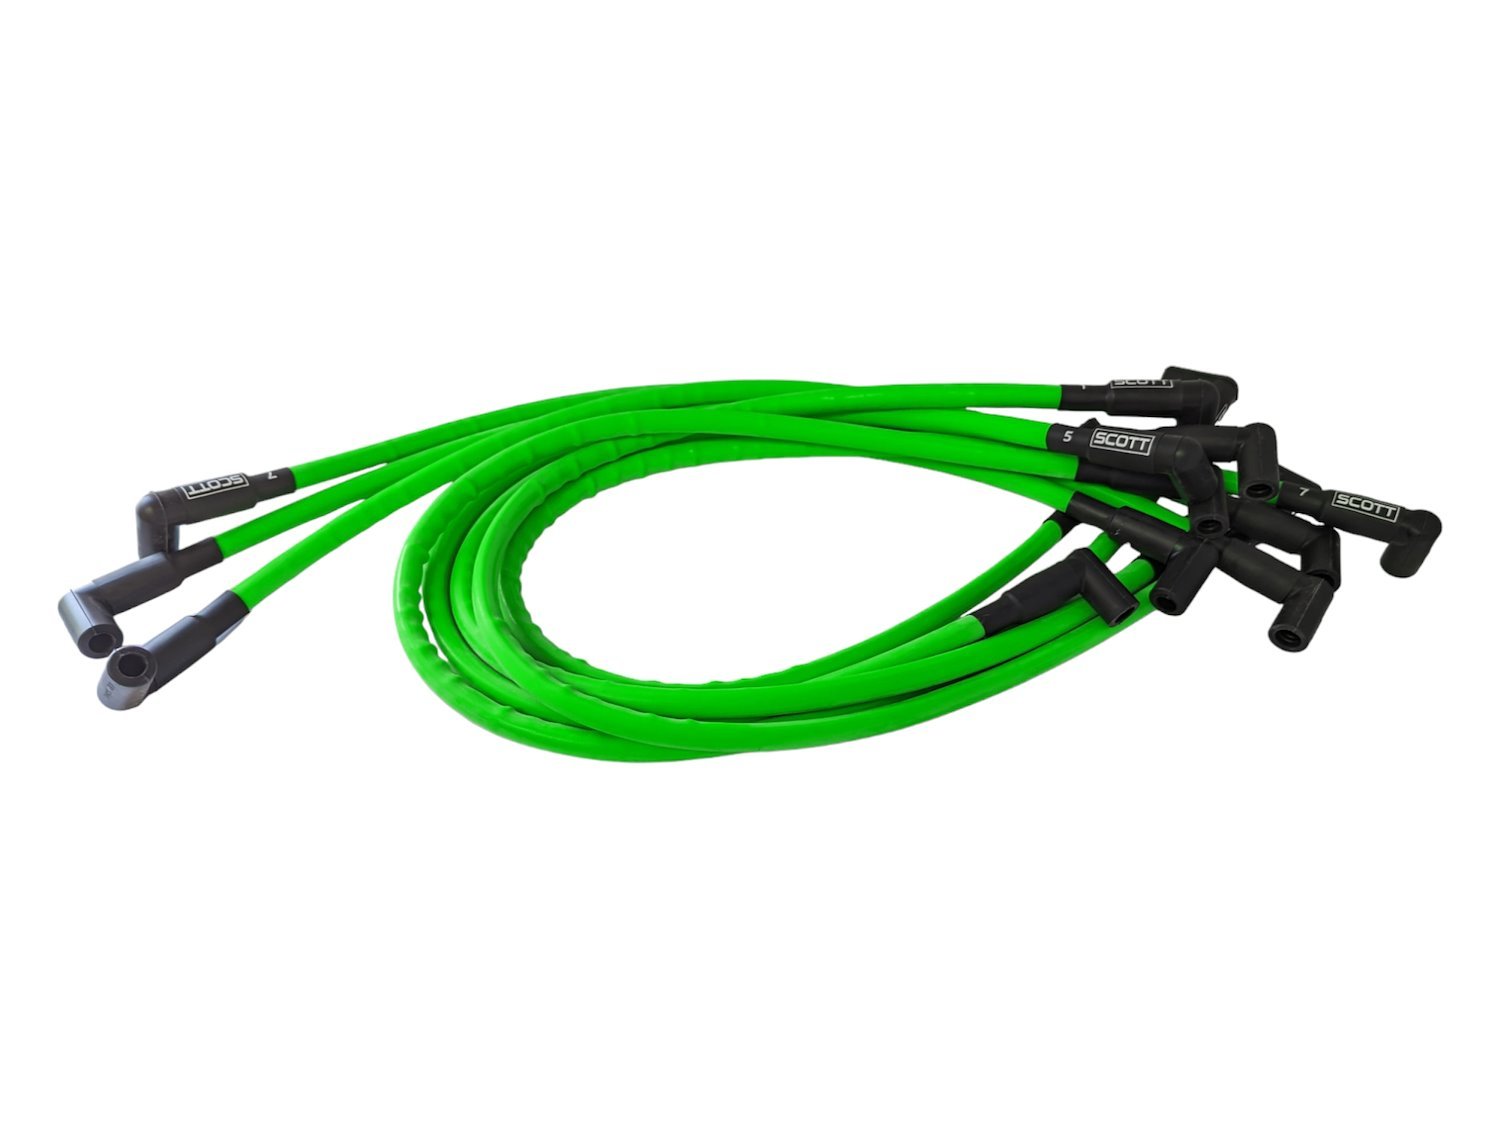 SPW-CH-437-8 High-Performance Silicone-Sleeved Spark Plug Wire Set for Small Block Chevy, Over & Under [Fluorescent Green]